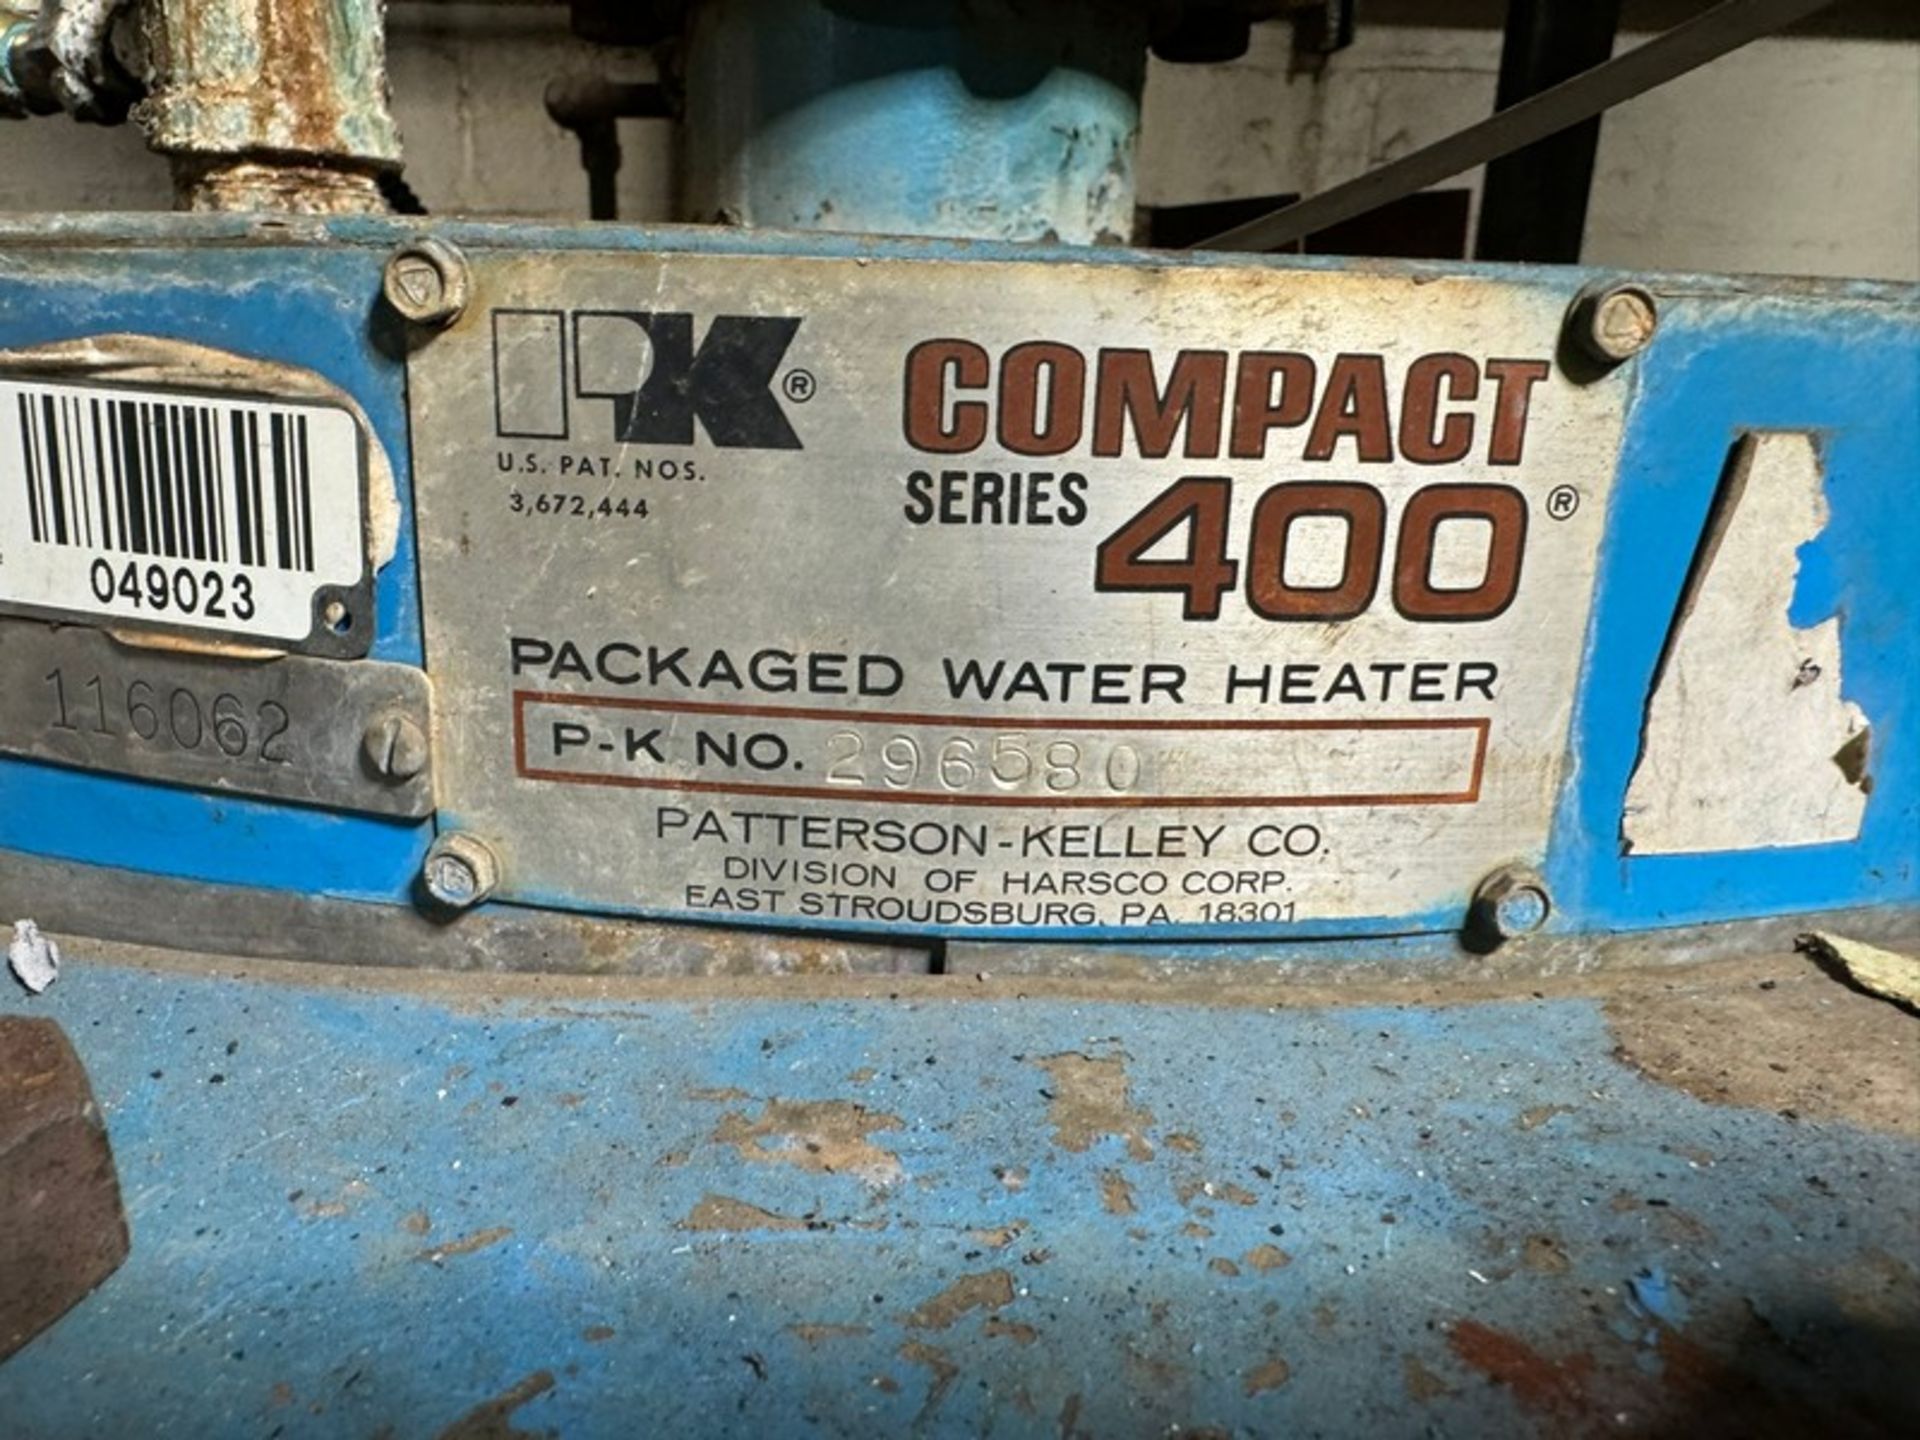 Patterson-Kelley Packaged Water Heater, PK. No. 296580, Compact Series 400 (N: 049023)(LOCATED IN - Image 3 of 3